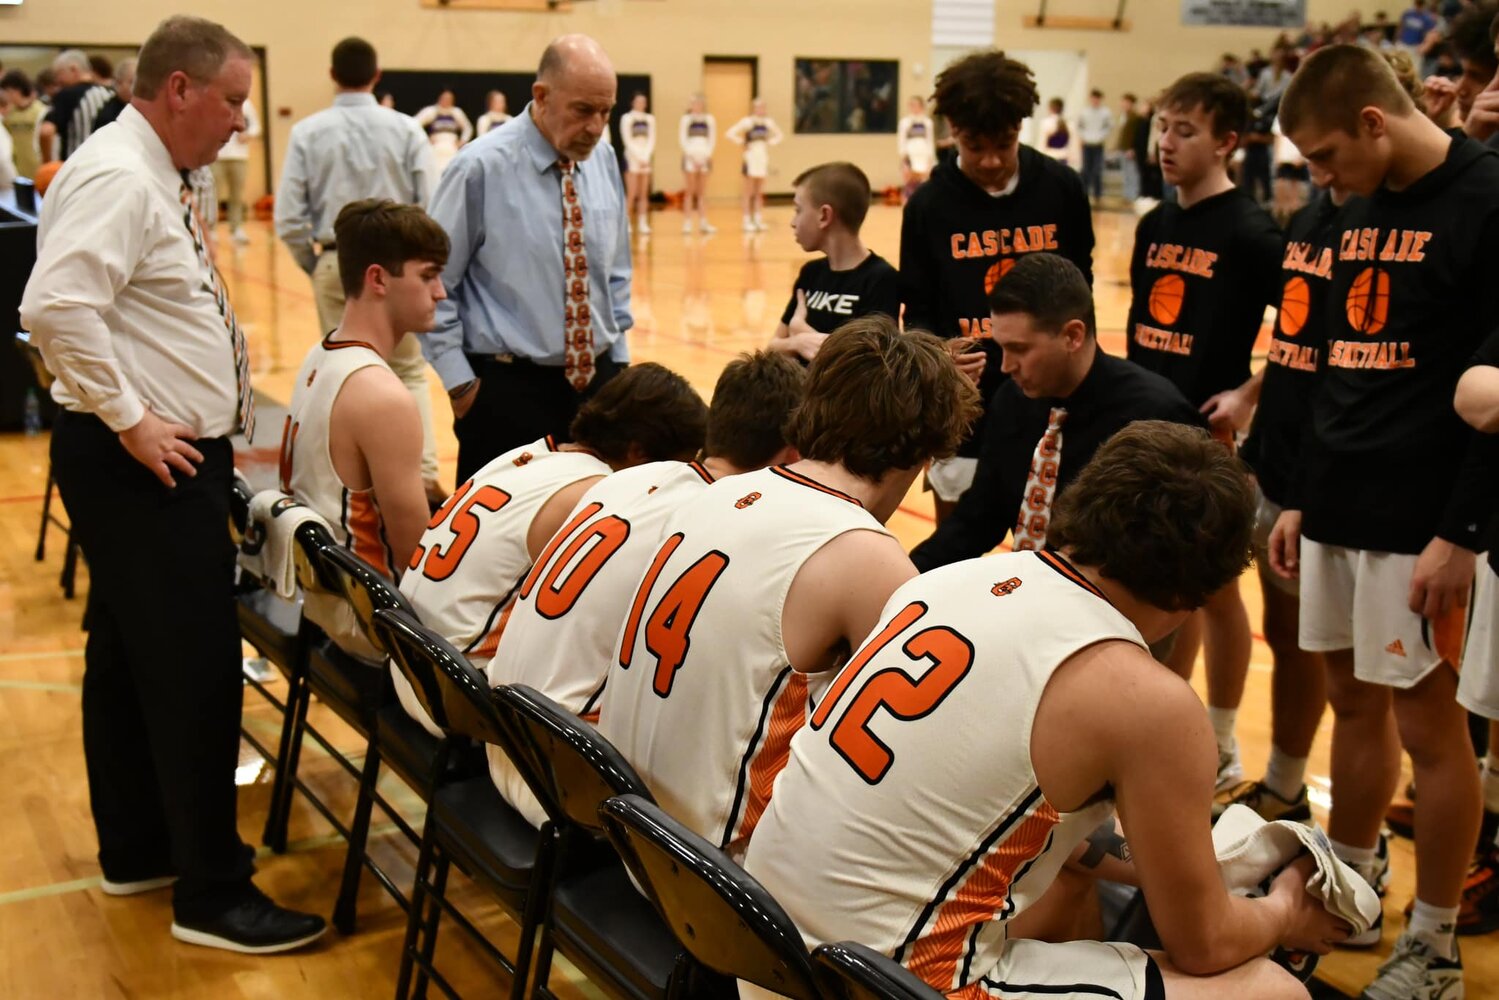 Chris Lawson (Center) gives his team final instructions before Tuesday night's matchup.